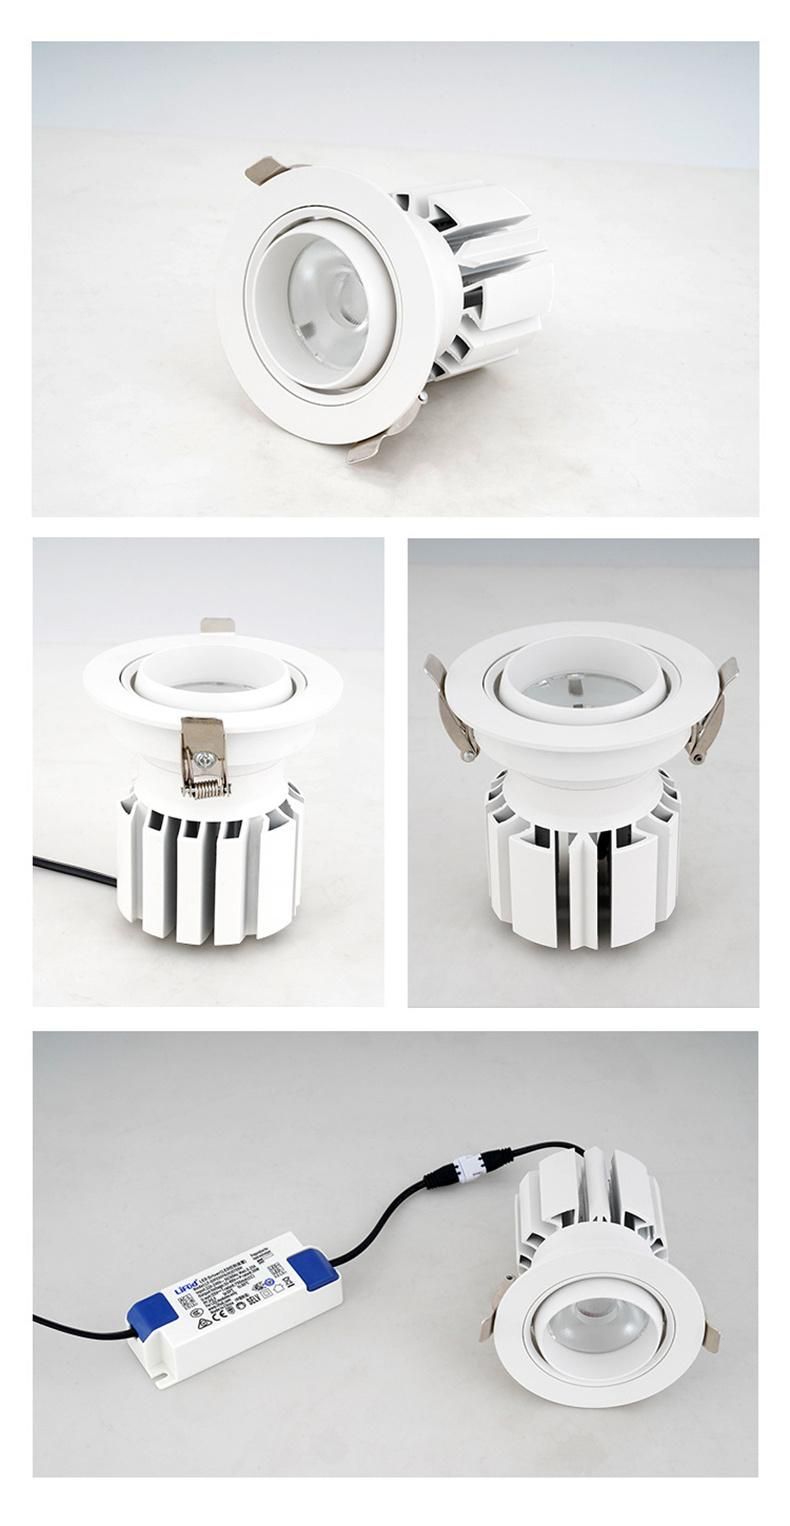 Adjustable Wall Washer Spotlight Corridor COB LED Downlight for Hotel Coffee Stores